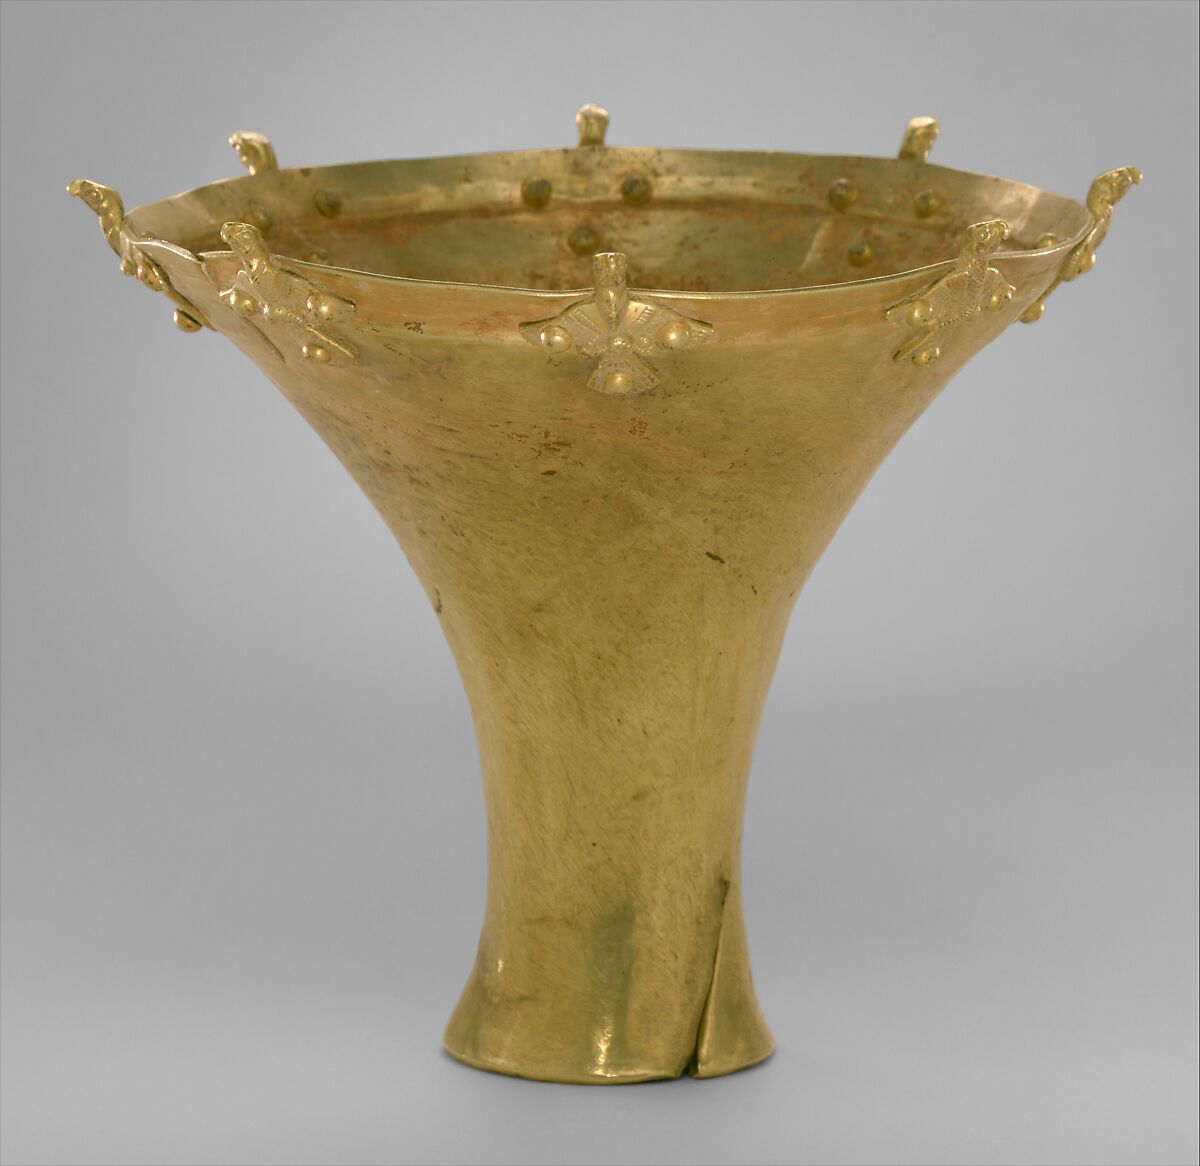 Beaker with birds on the rim, Electrum, Bactria-Margiana Archaeological Complex 